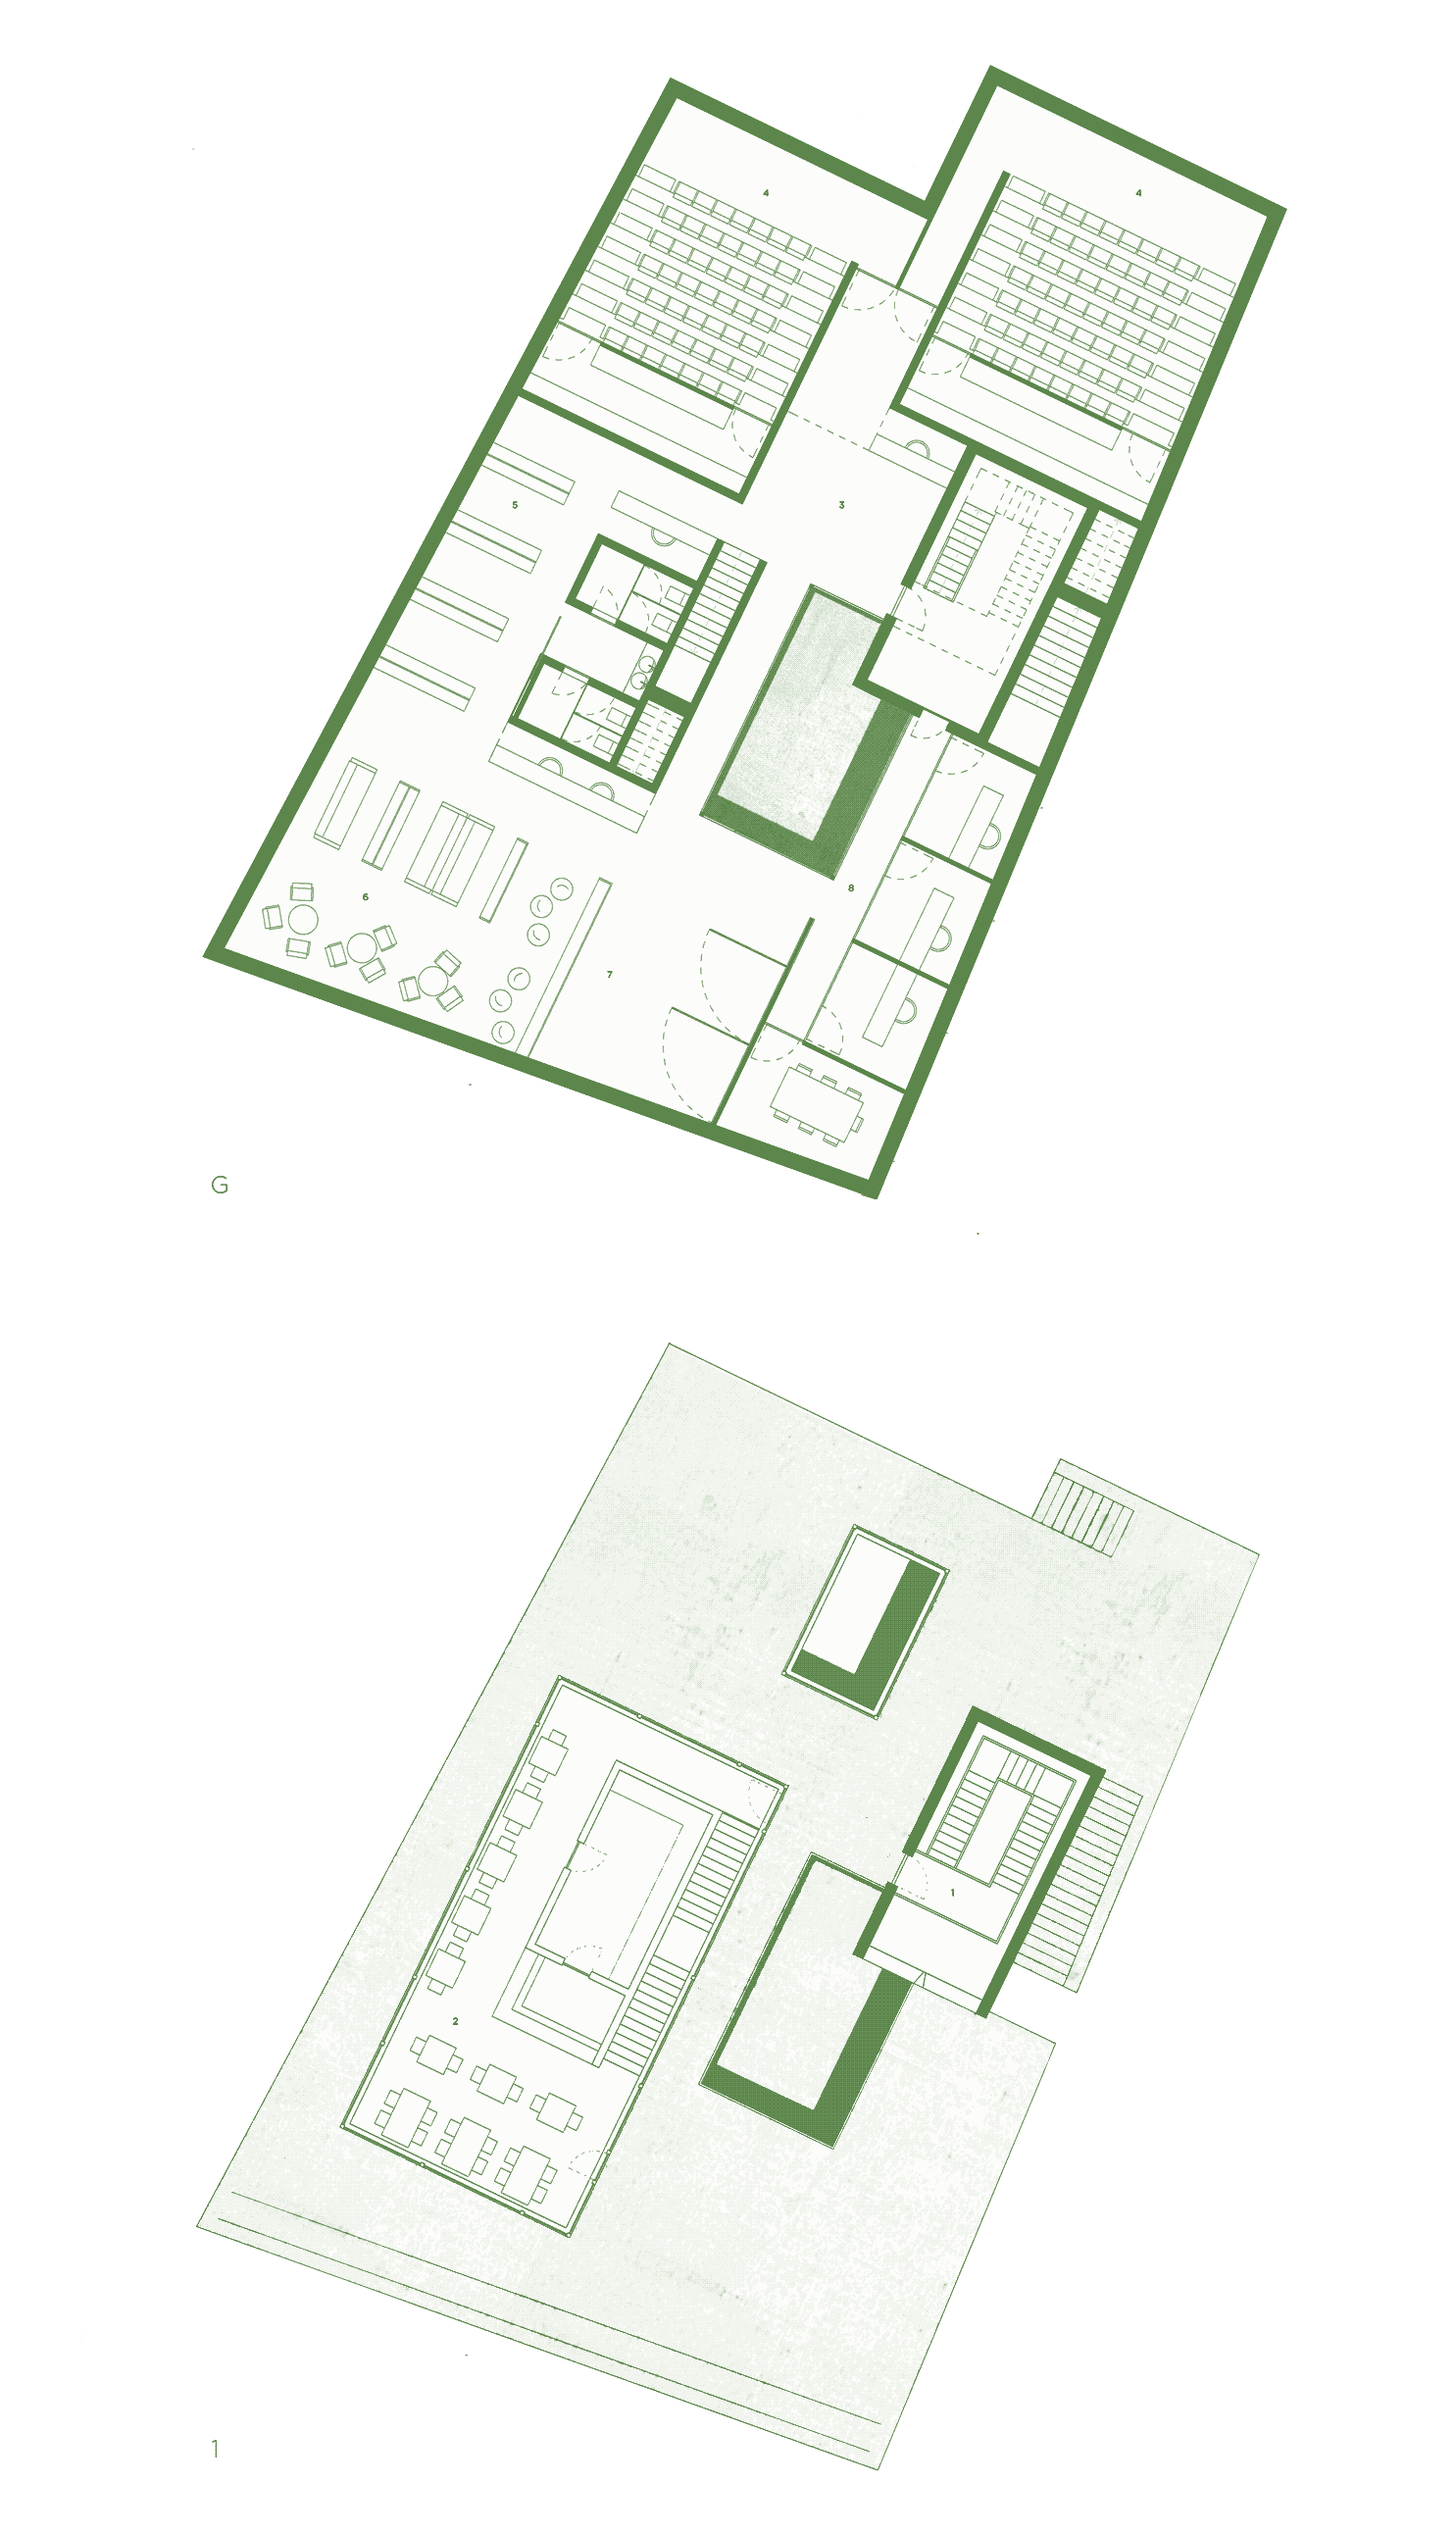 The floor plan of the ground and first floor of the Cinematheque